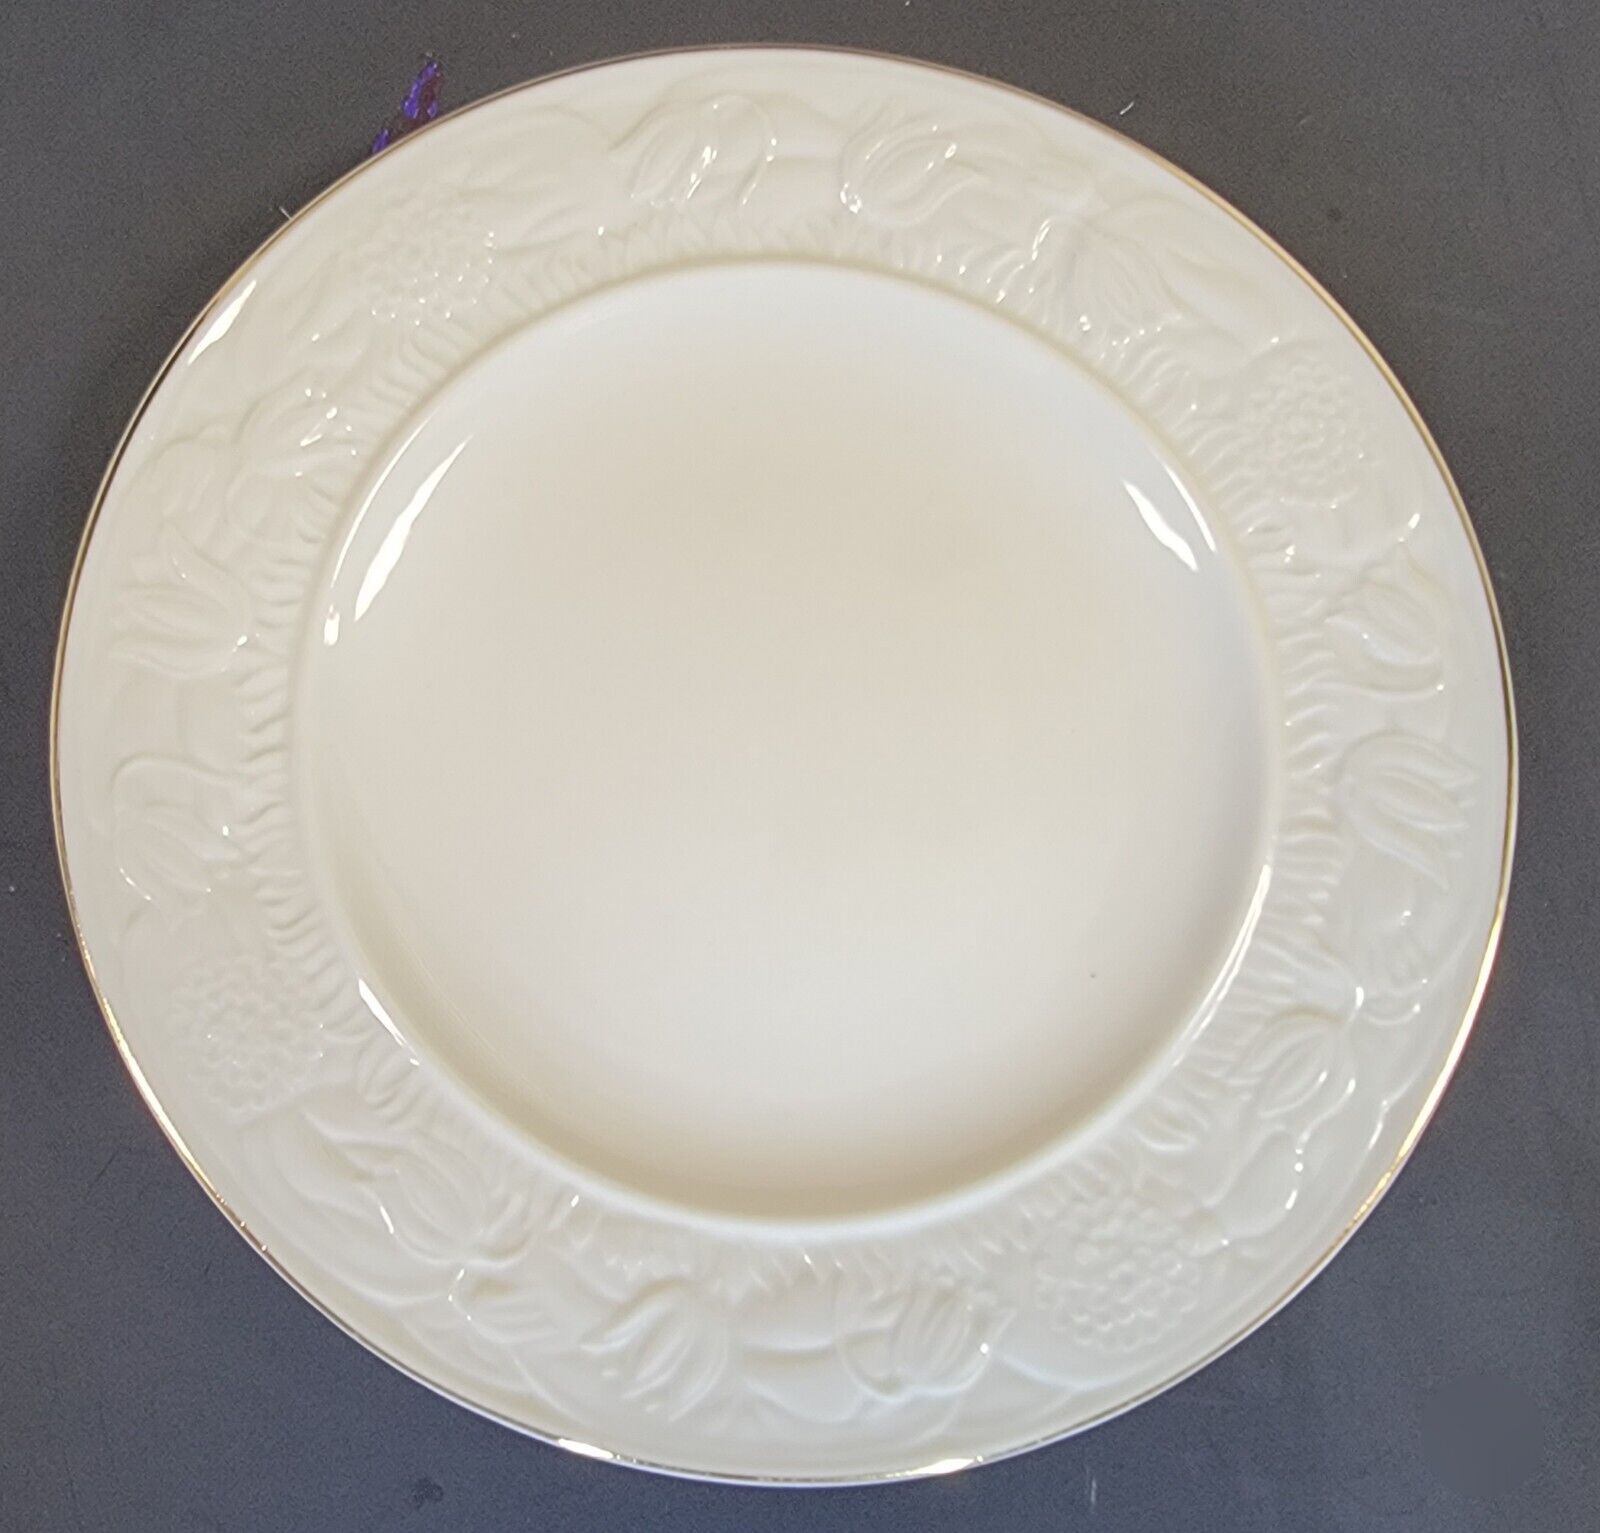 Belleek Serenity 1990s Salad Plate(s) Excellent Multiples Available 